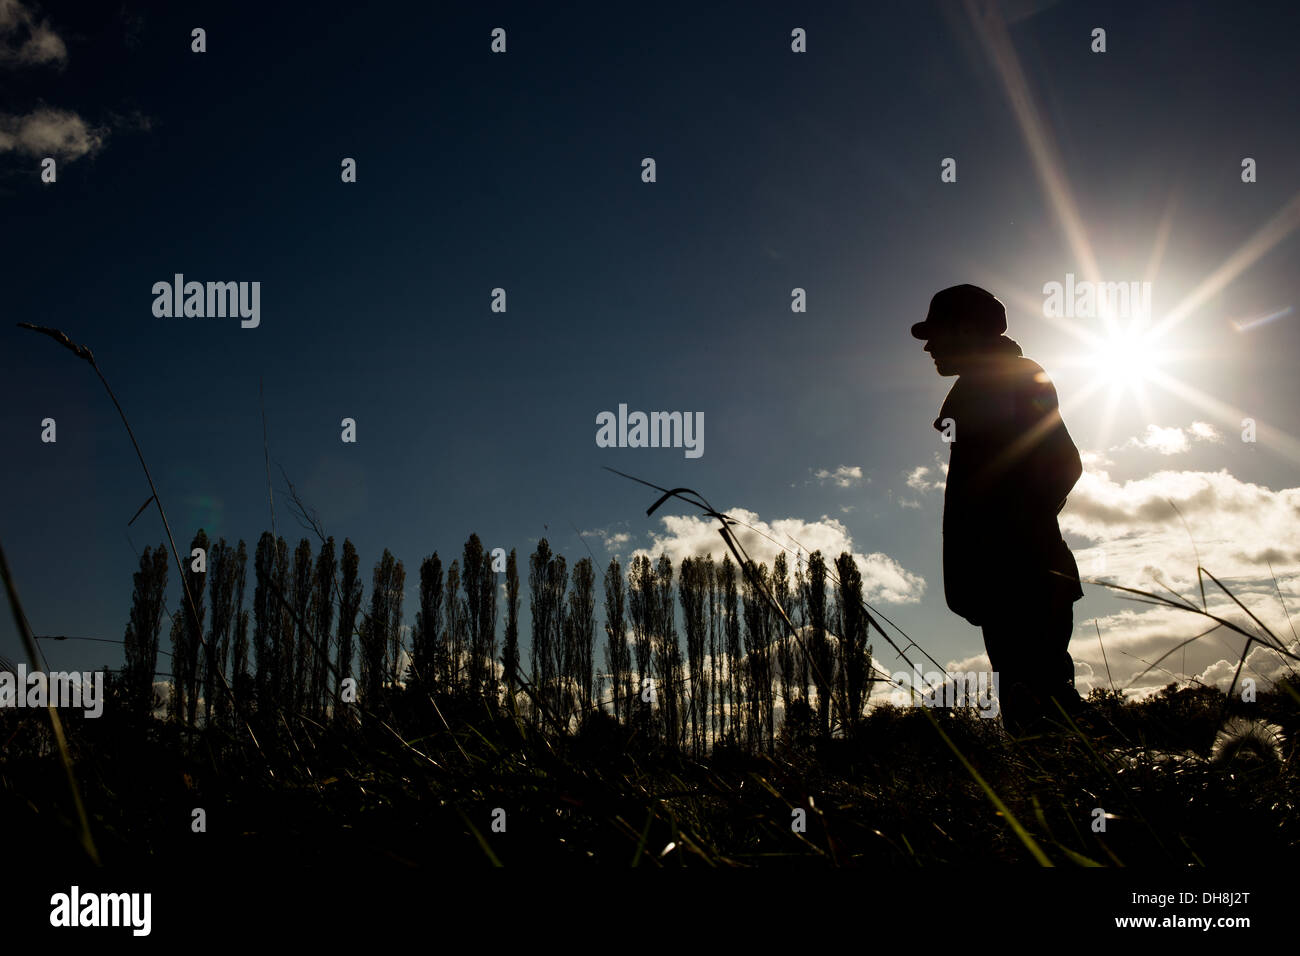 Silhouette of a man walking in Chorlton Ees, Manchester, with the silhouette of Poplar trees in the background Stock Photo